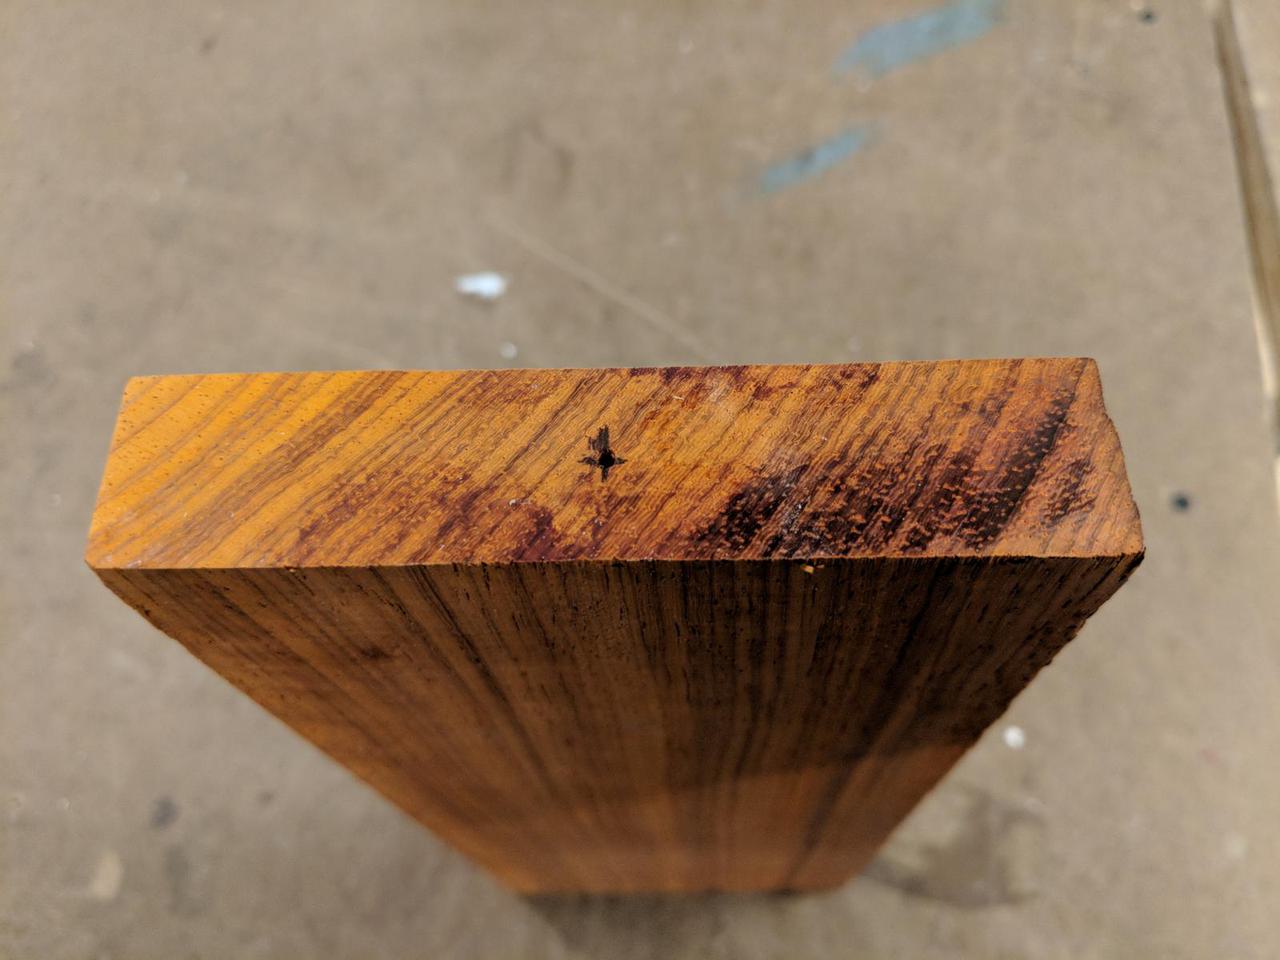 end of piece of wood with small 'x' in the center.